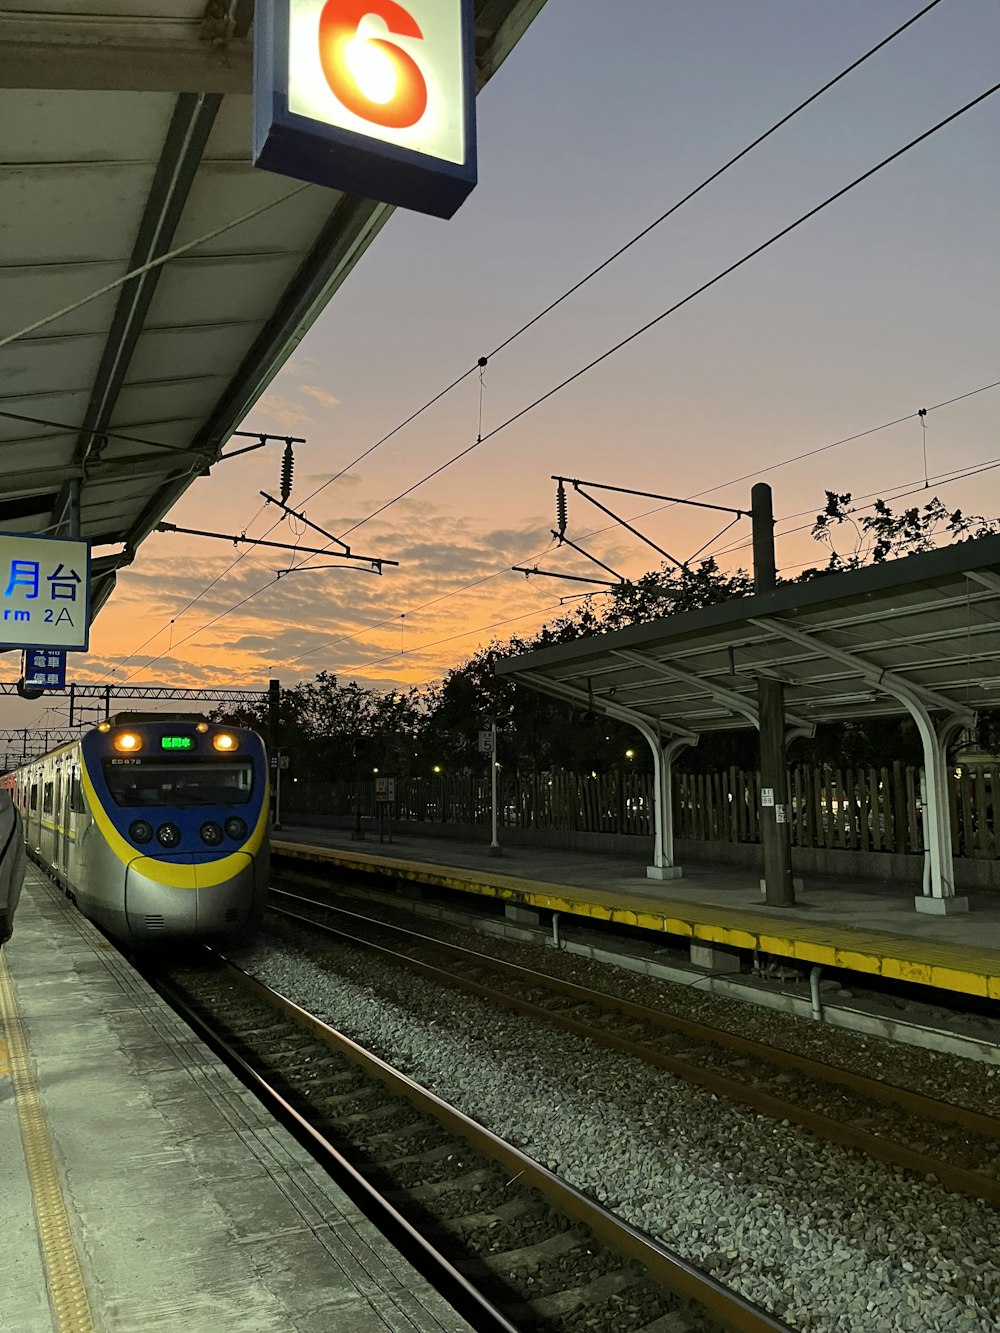 a train pulling into a train station at dusk